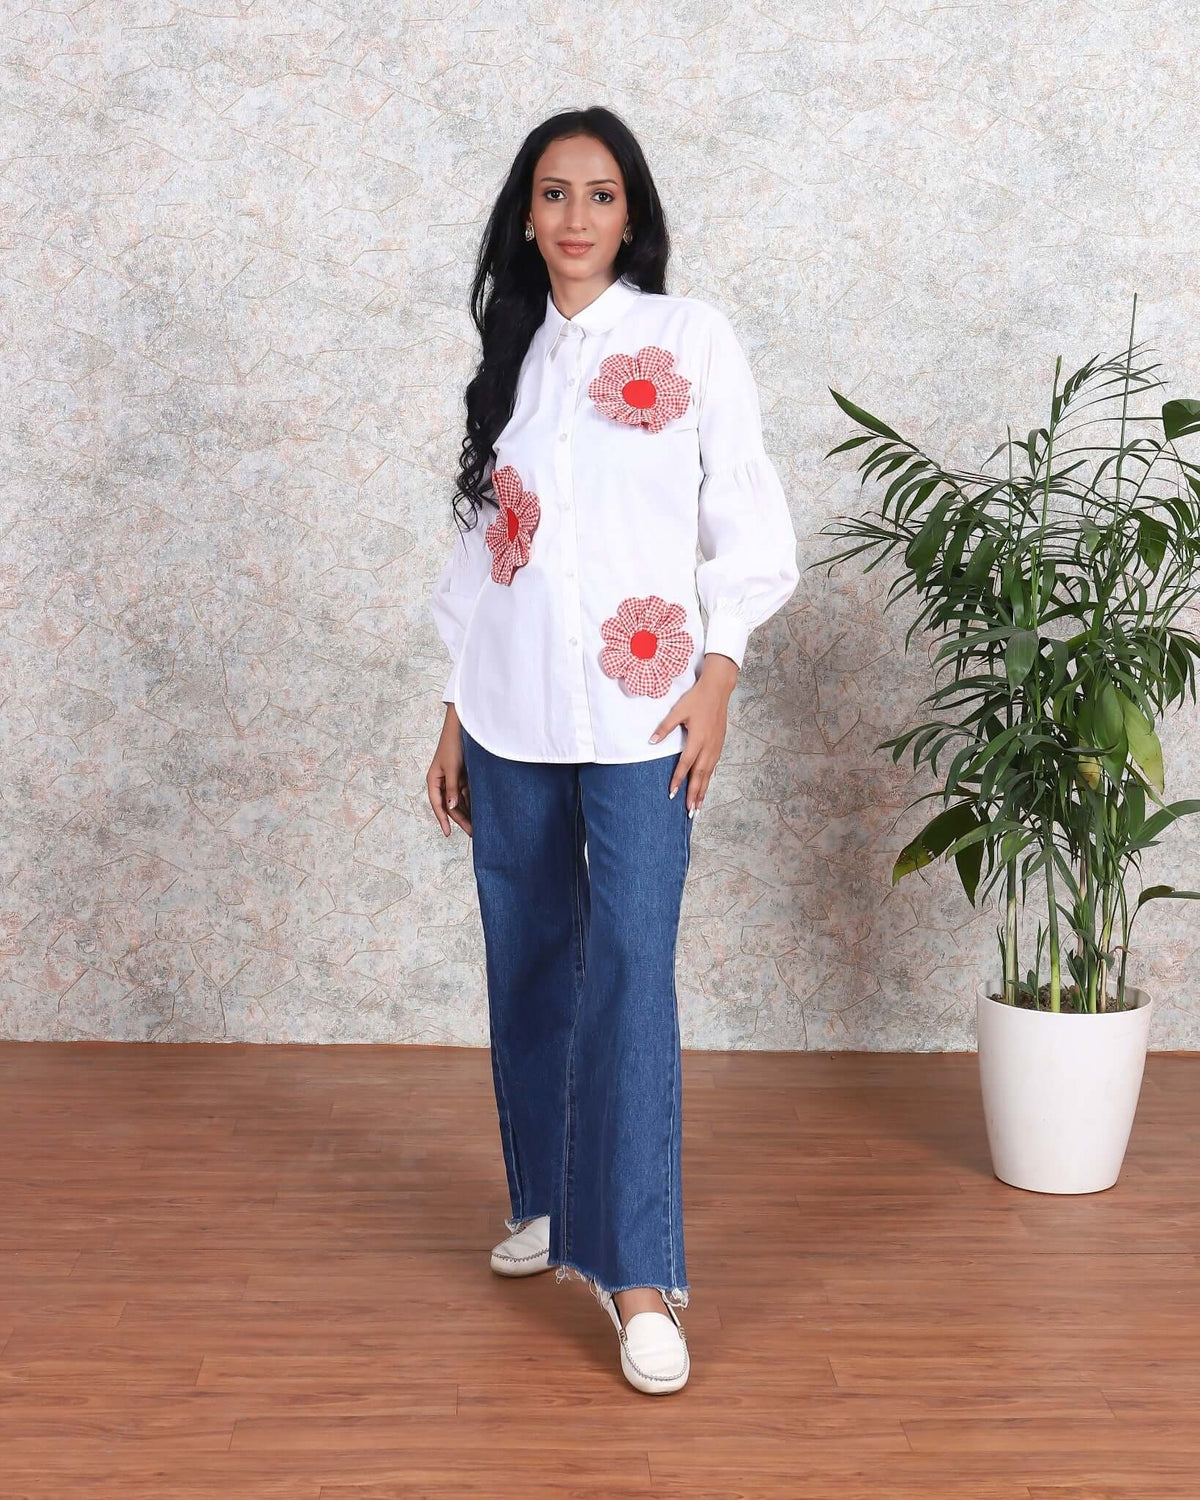 Trendy women's white cotton shirt with bold red floral appliqués, worn by a woman, perfect for casual summer fashion by House Of Majisha